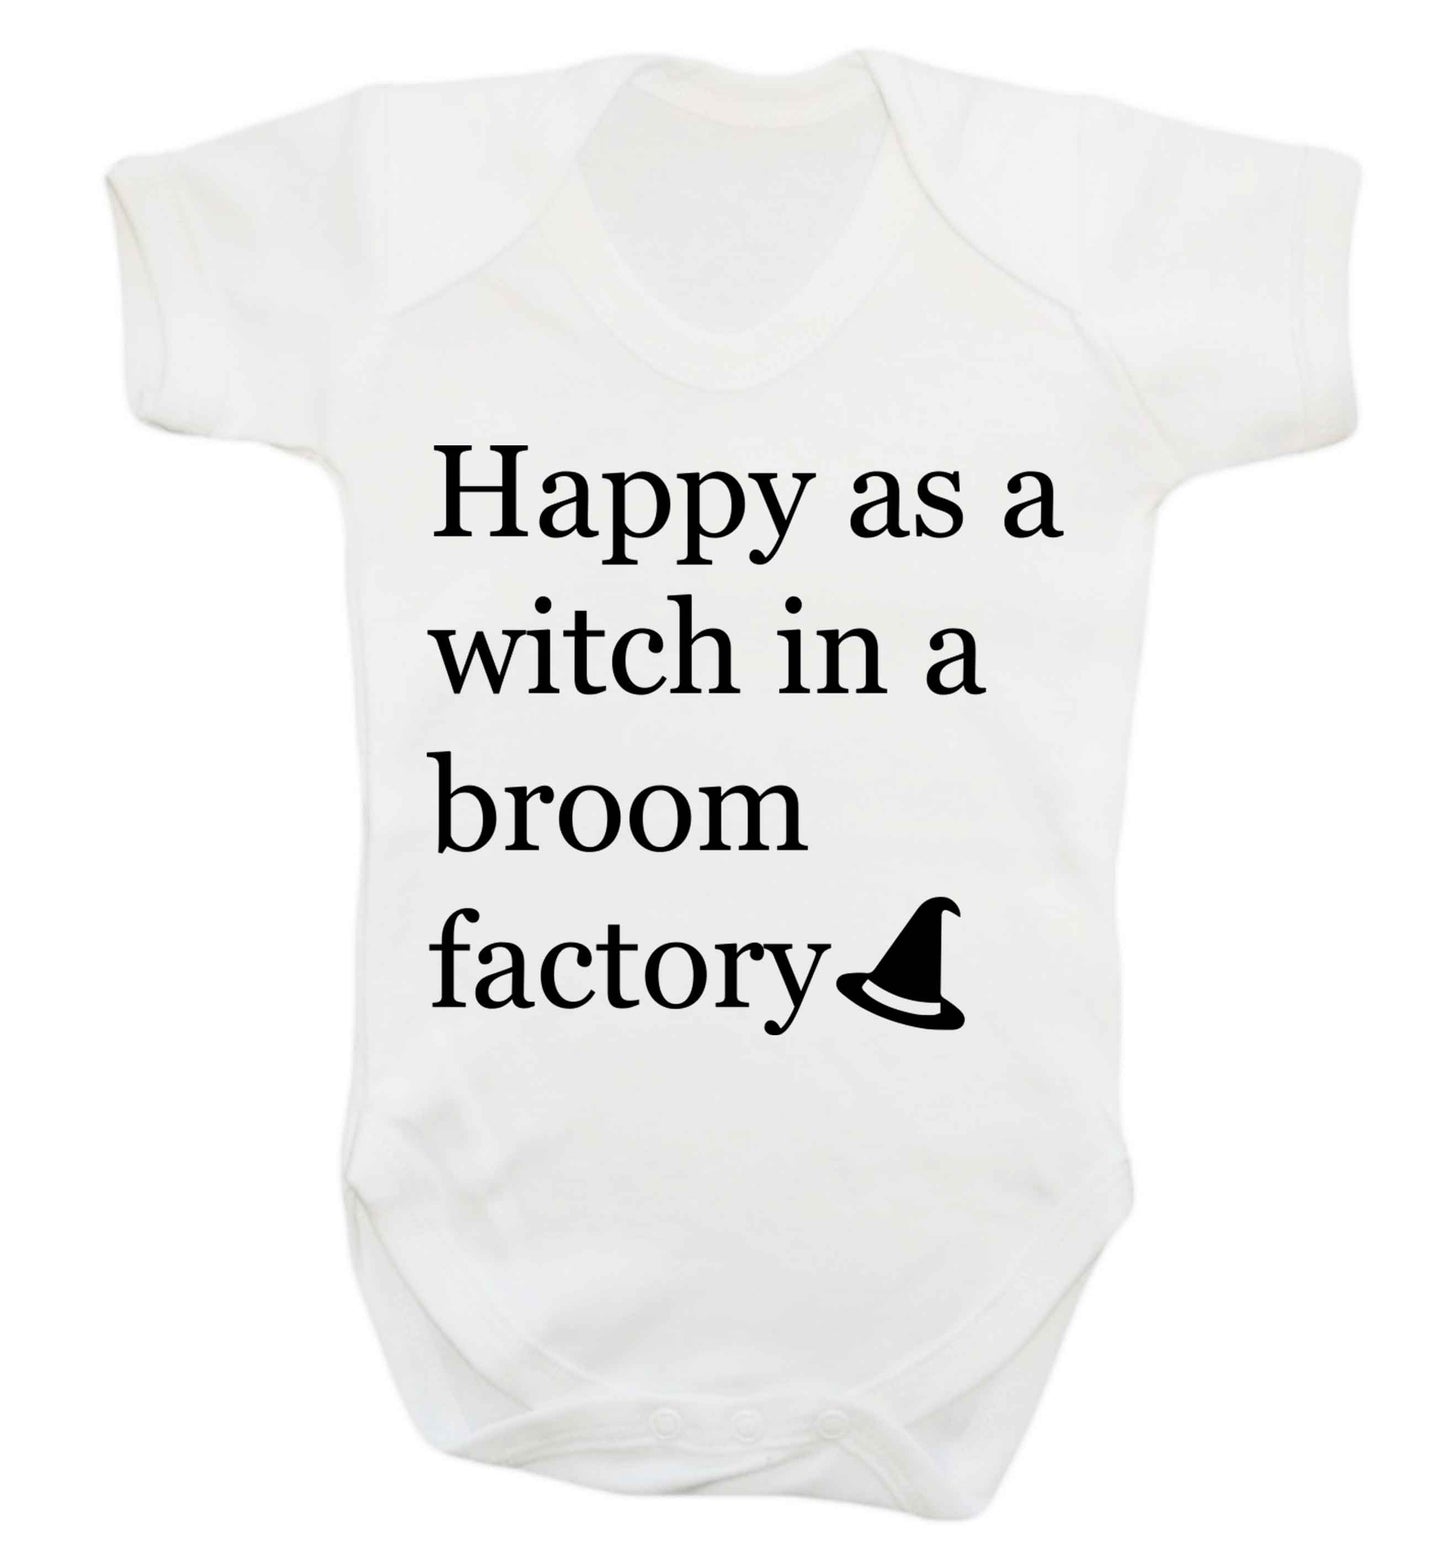 Happy as a witch in a broom factory Baby Vest white 18-24 months